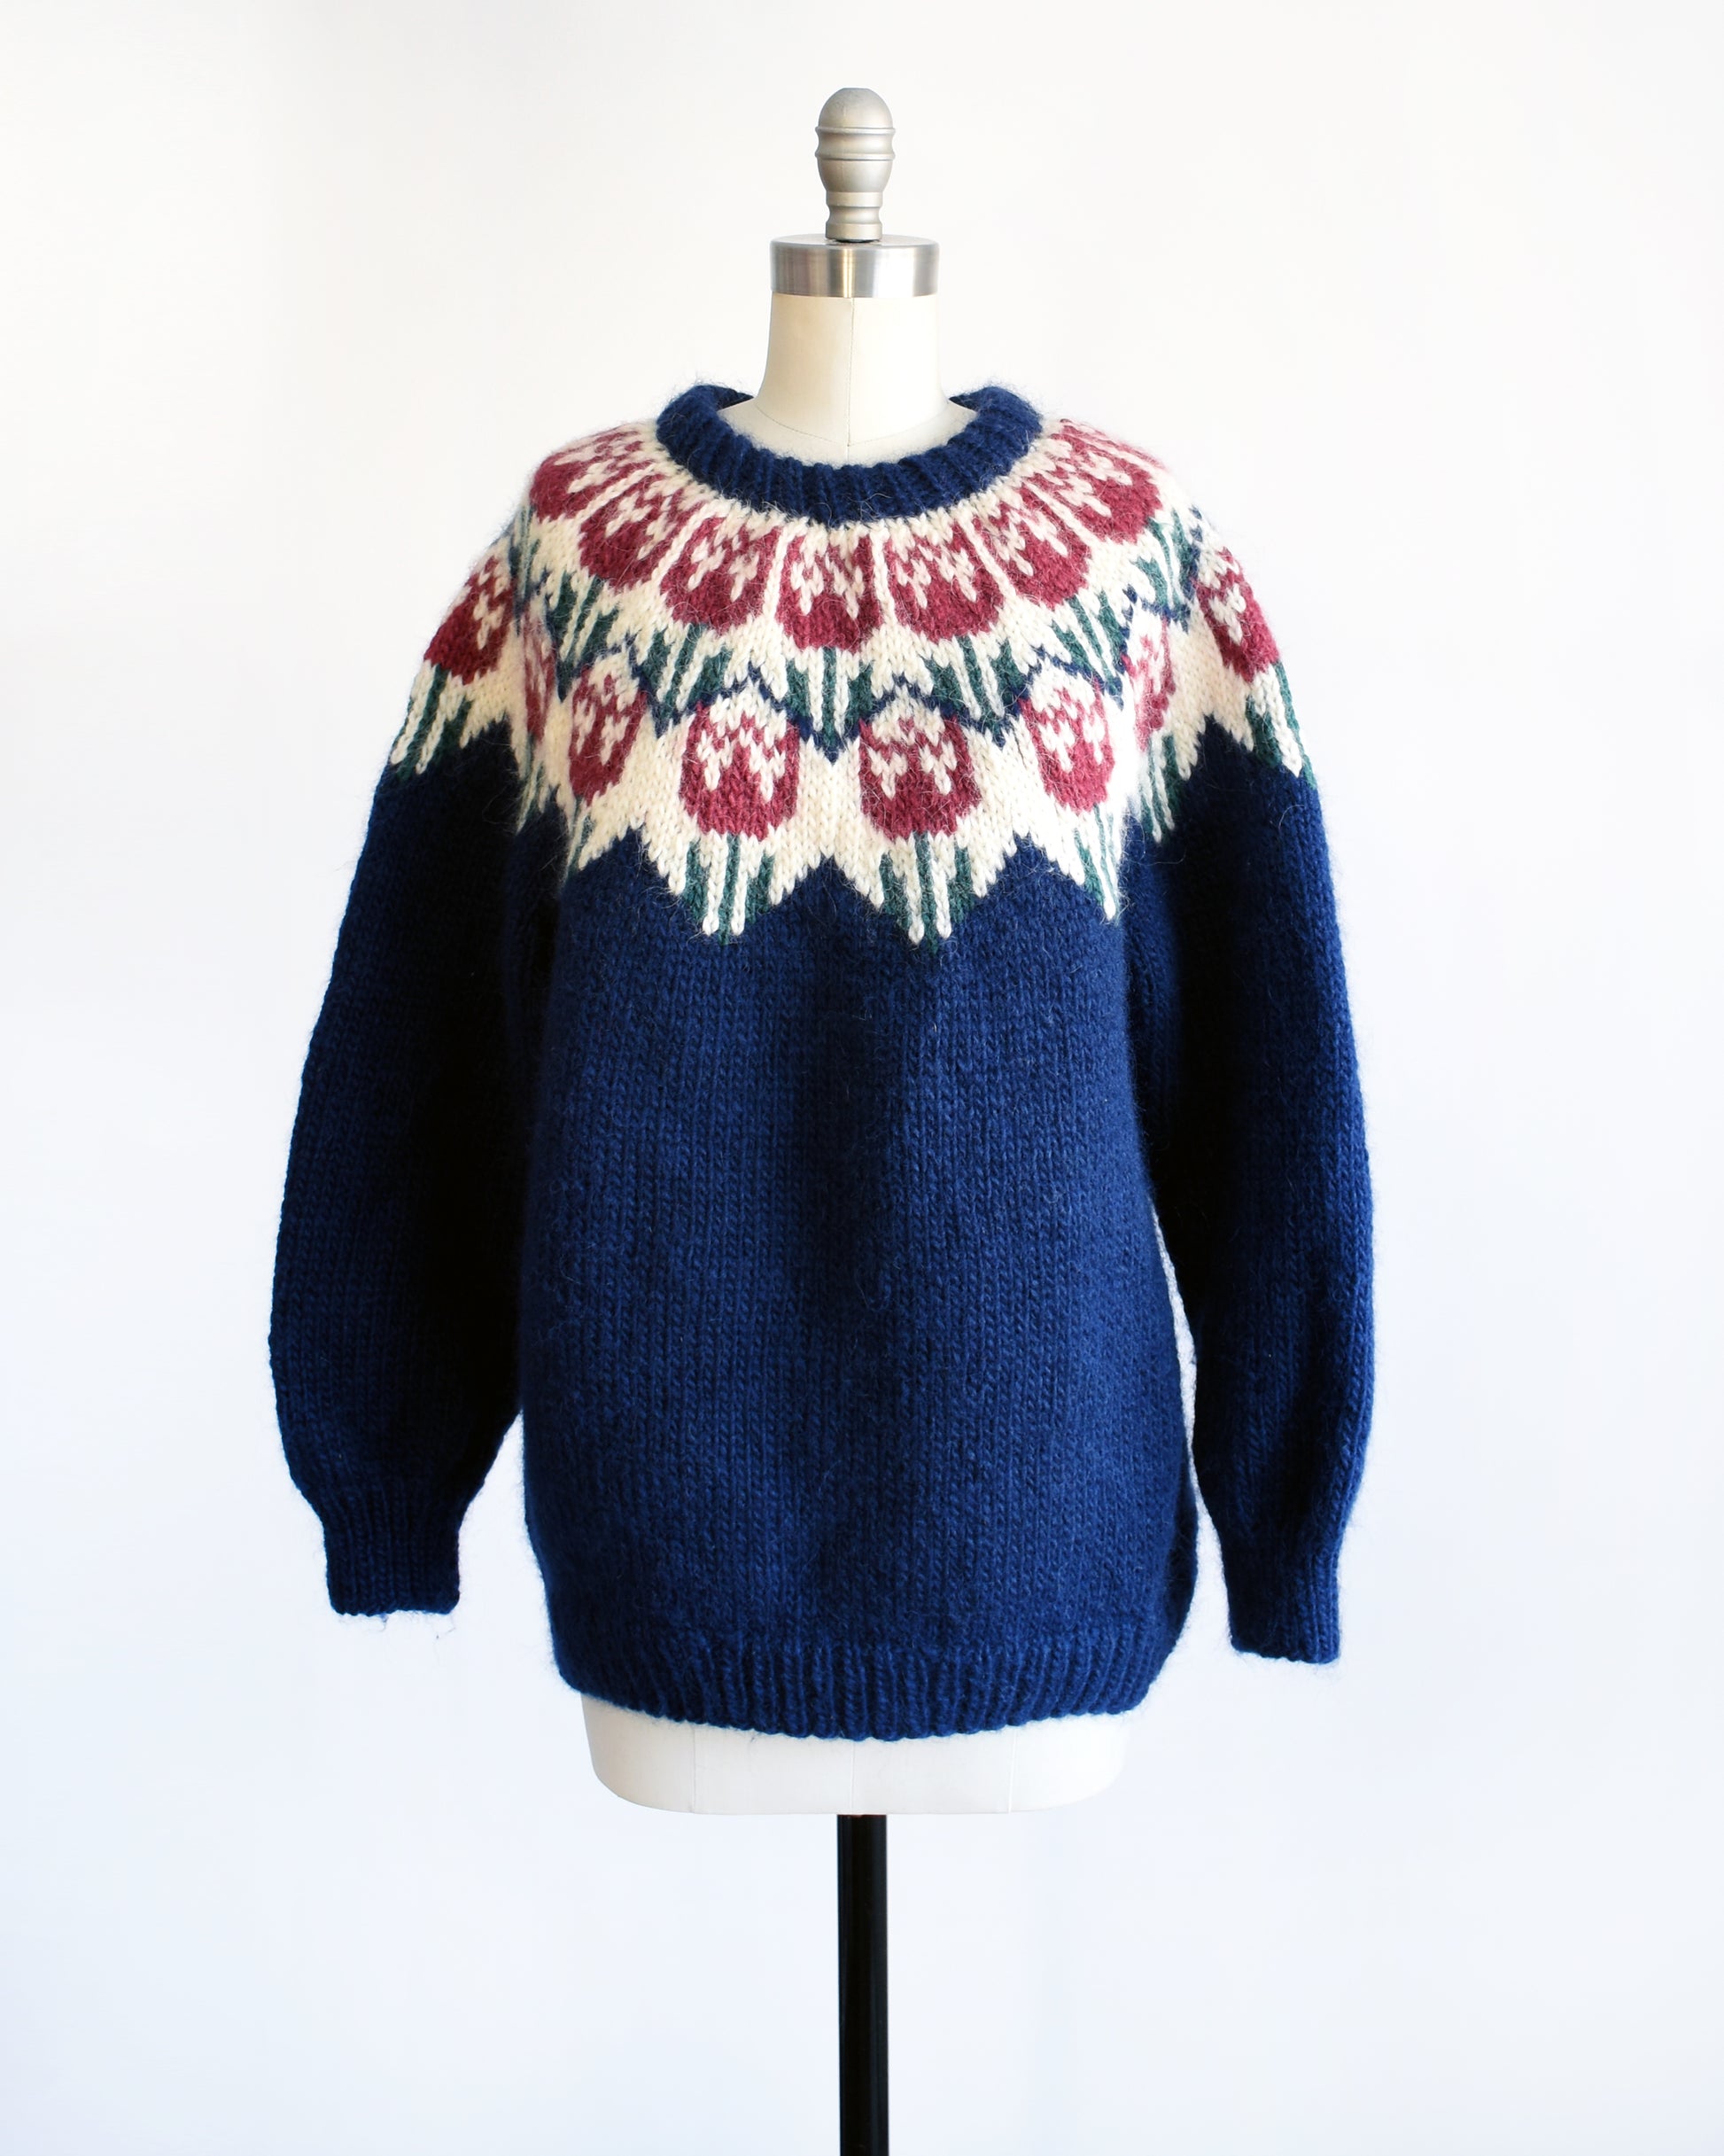 A vintage 1980s navy blue Fair Isle sweater that features a dark pink and green tulip pattern around the collar.